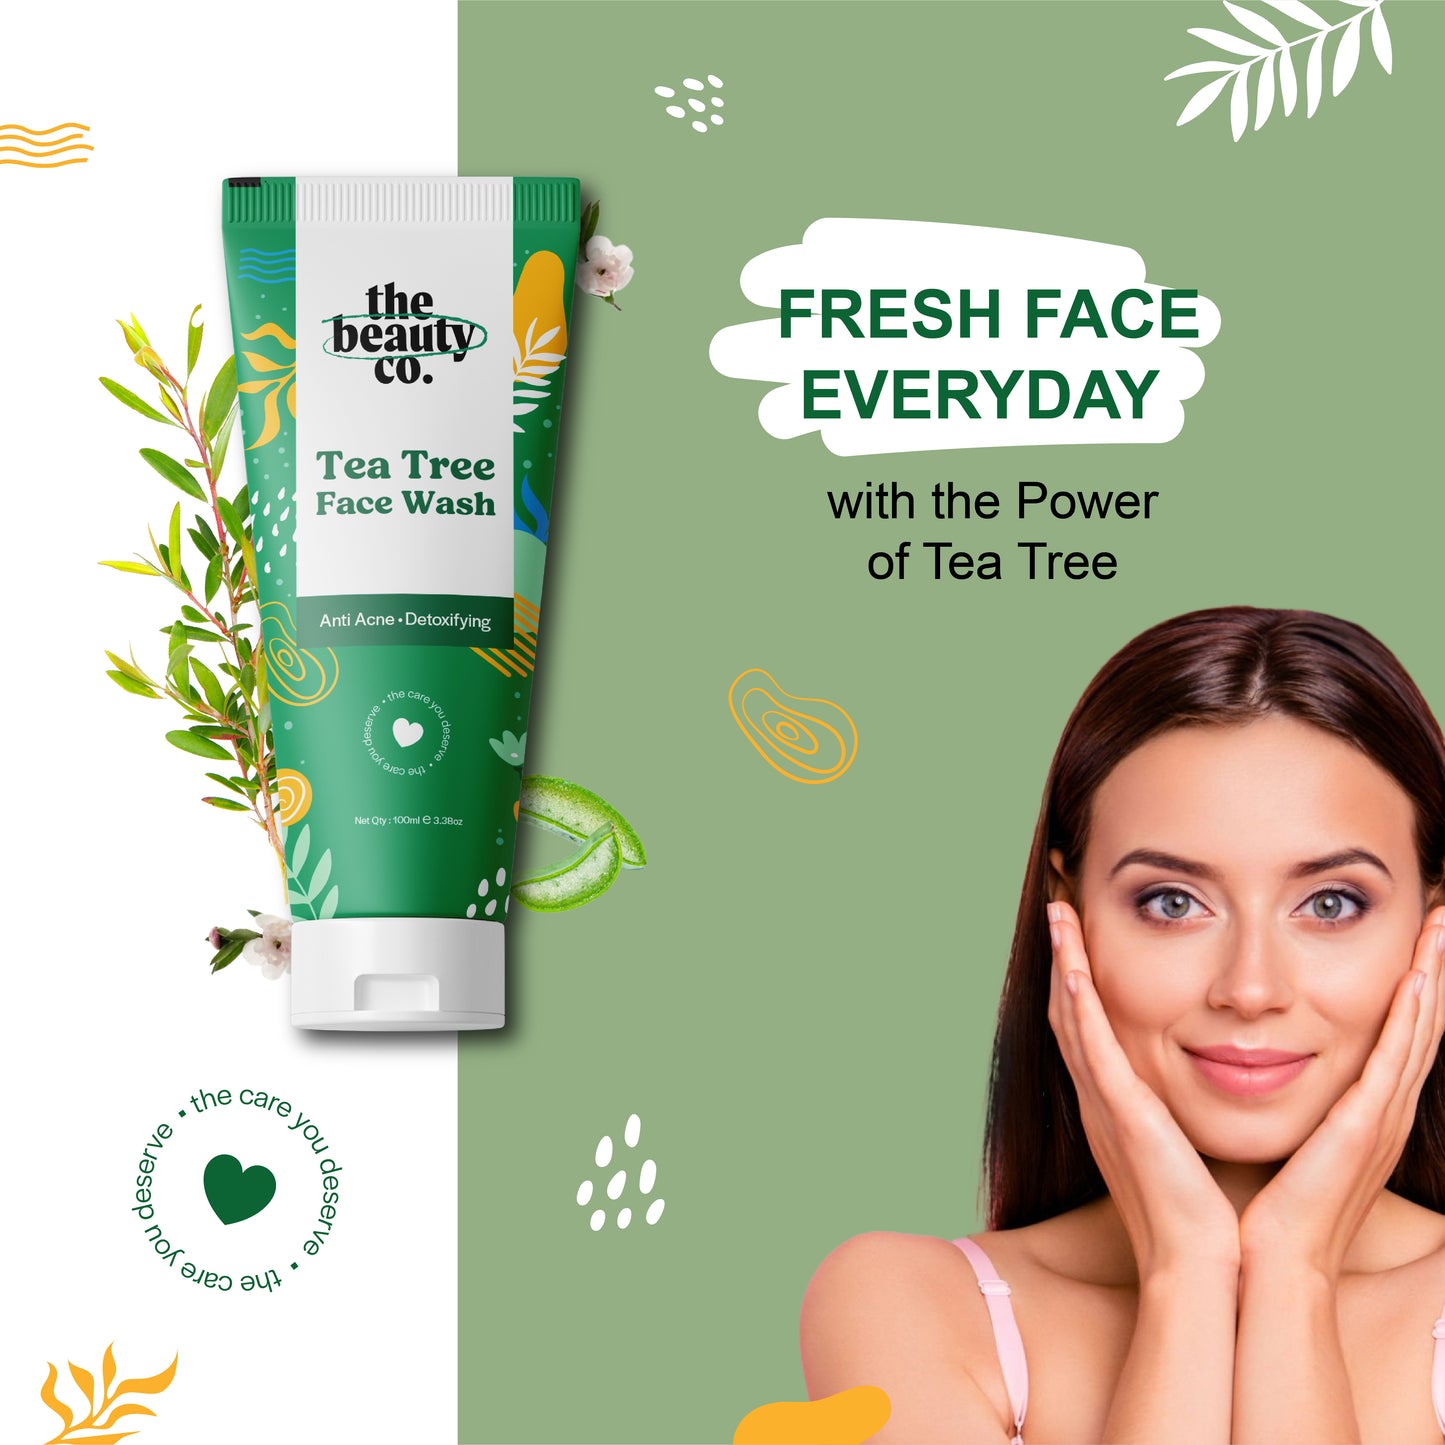 Tea Tree Face Wash With Salicylic Acid For Acne Control